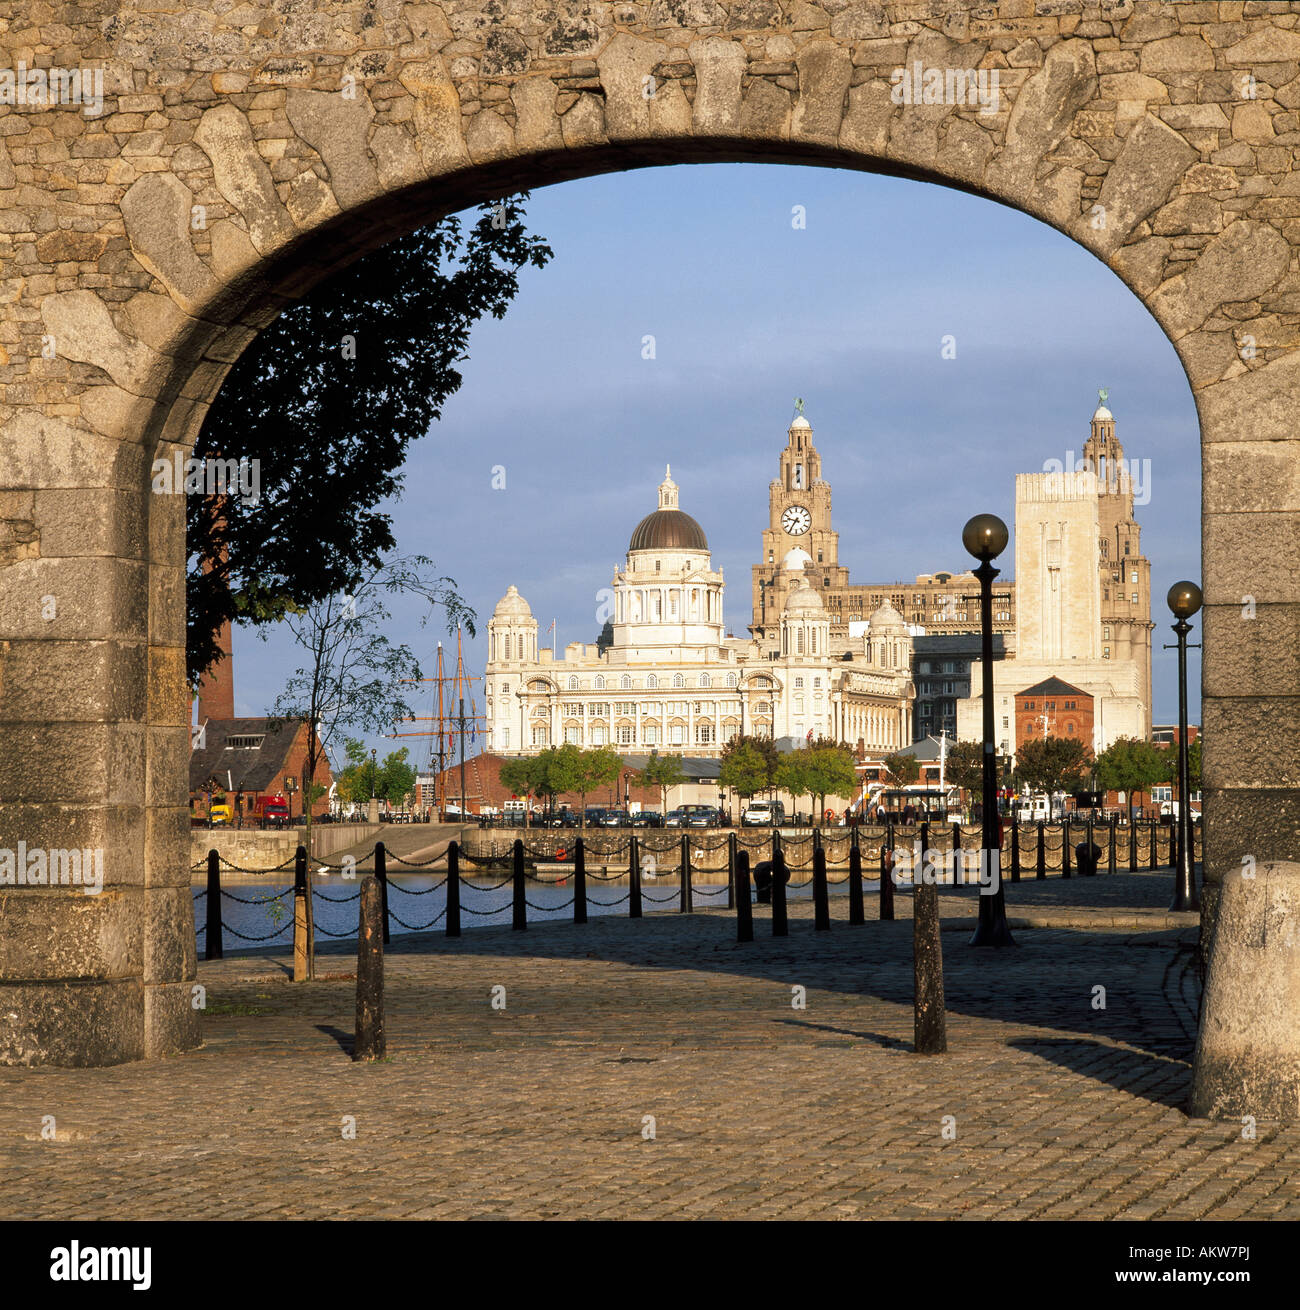 Looking through arch at Liverpool dock buidings. Stock Photo